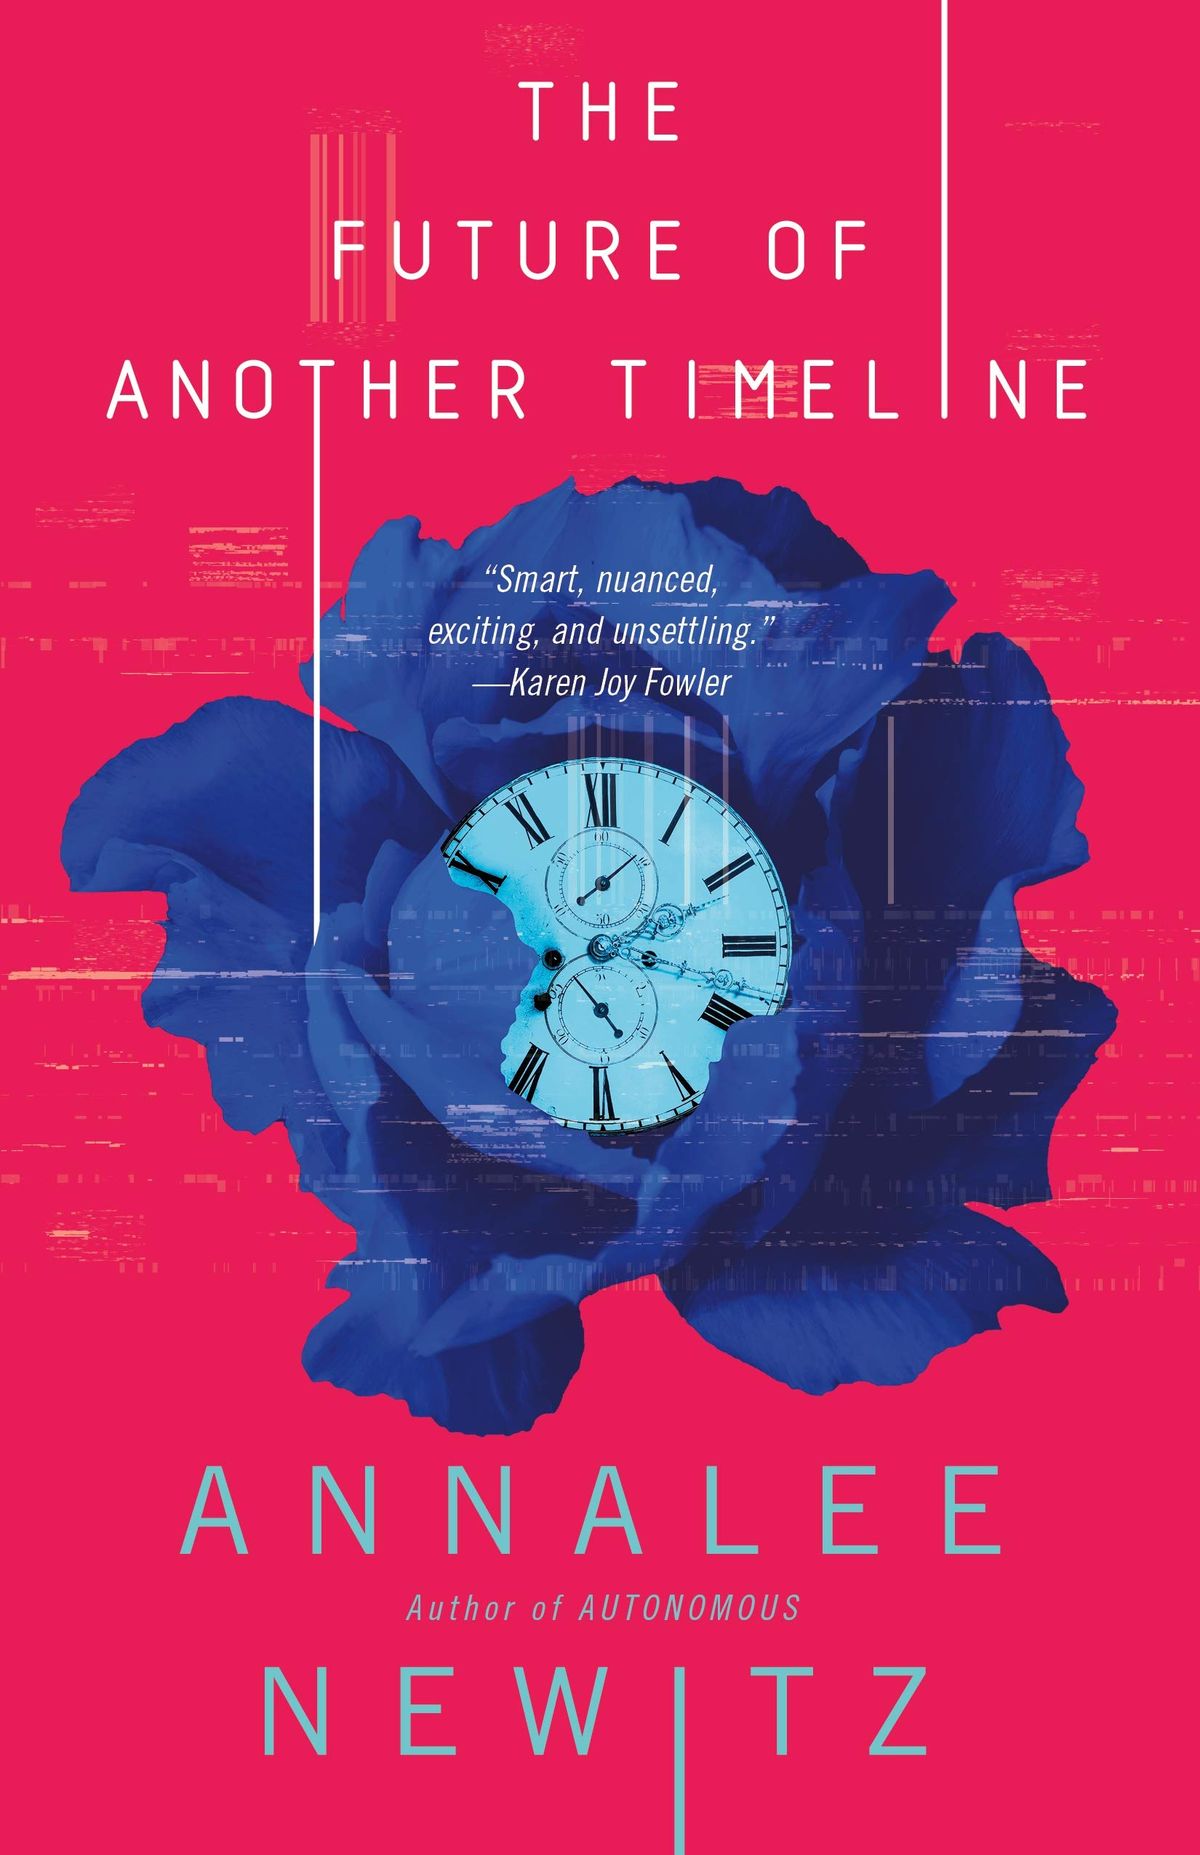 Cover of “The Future of Another Timeline” by Annalee Newitz